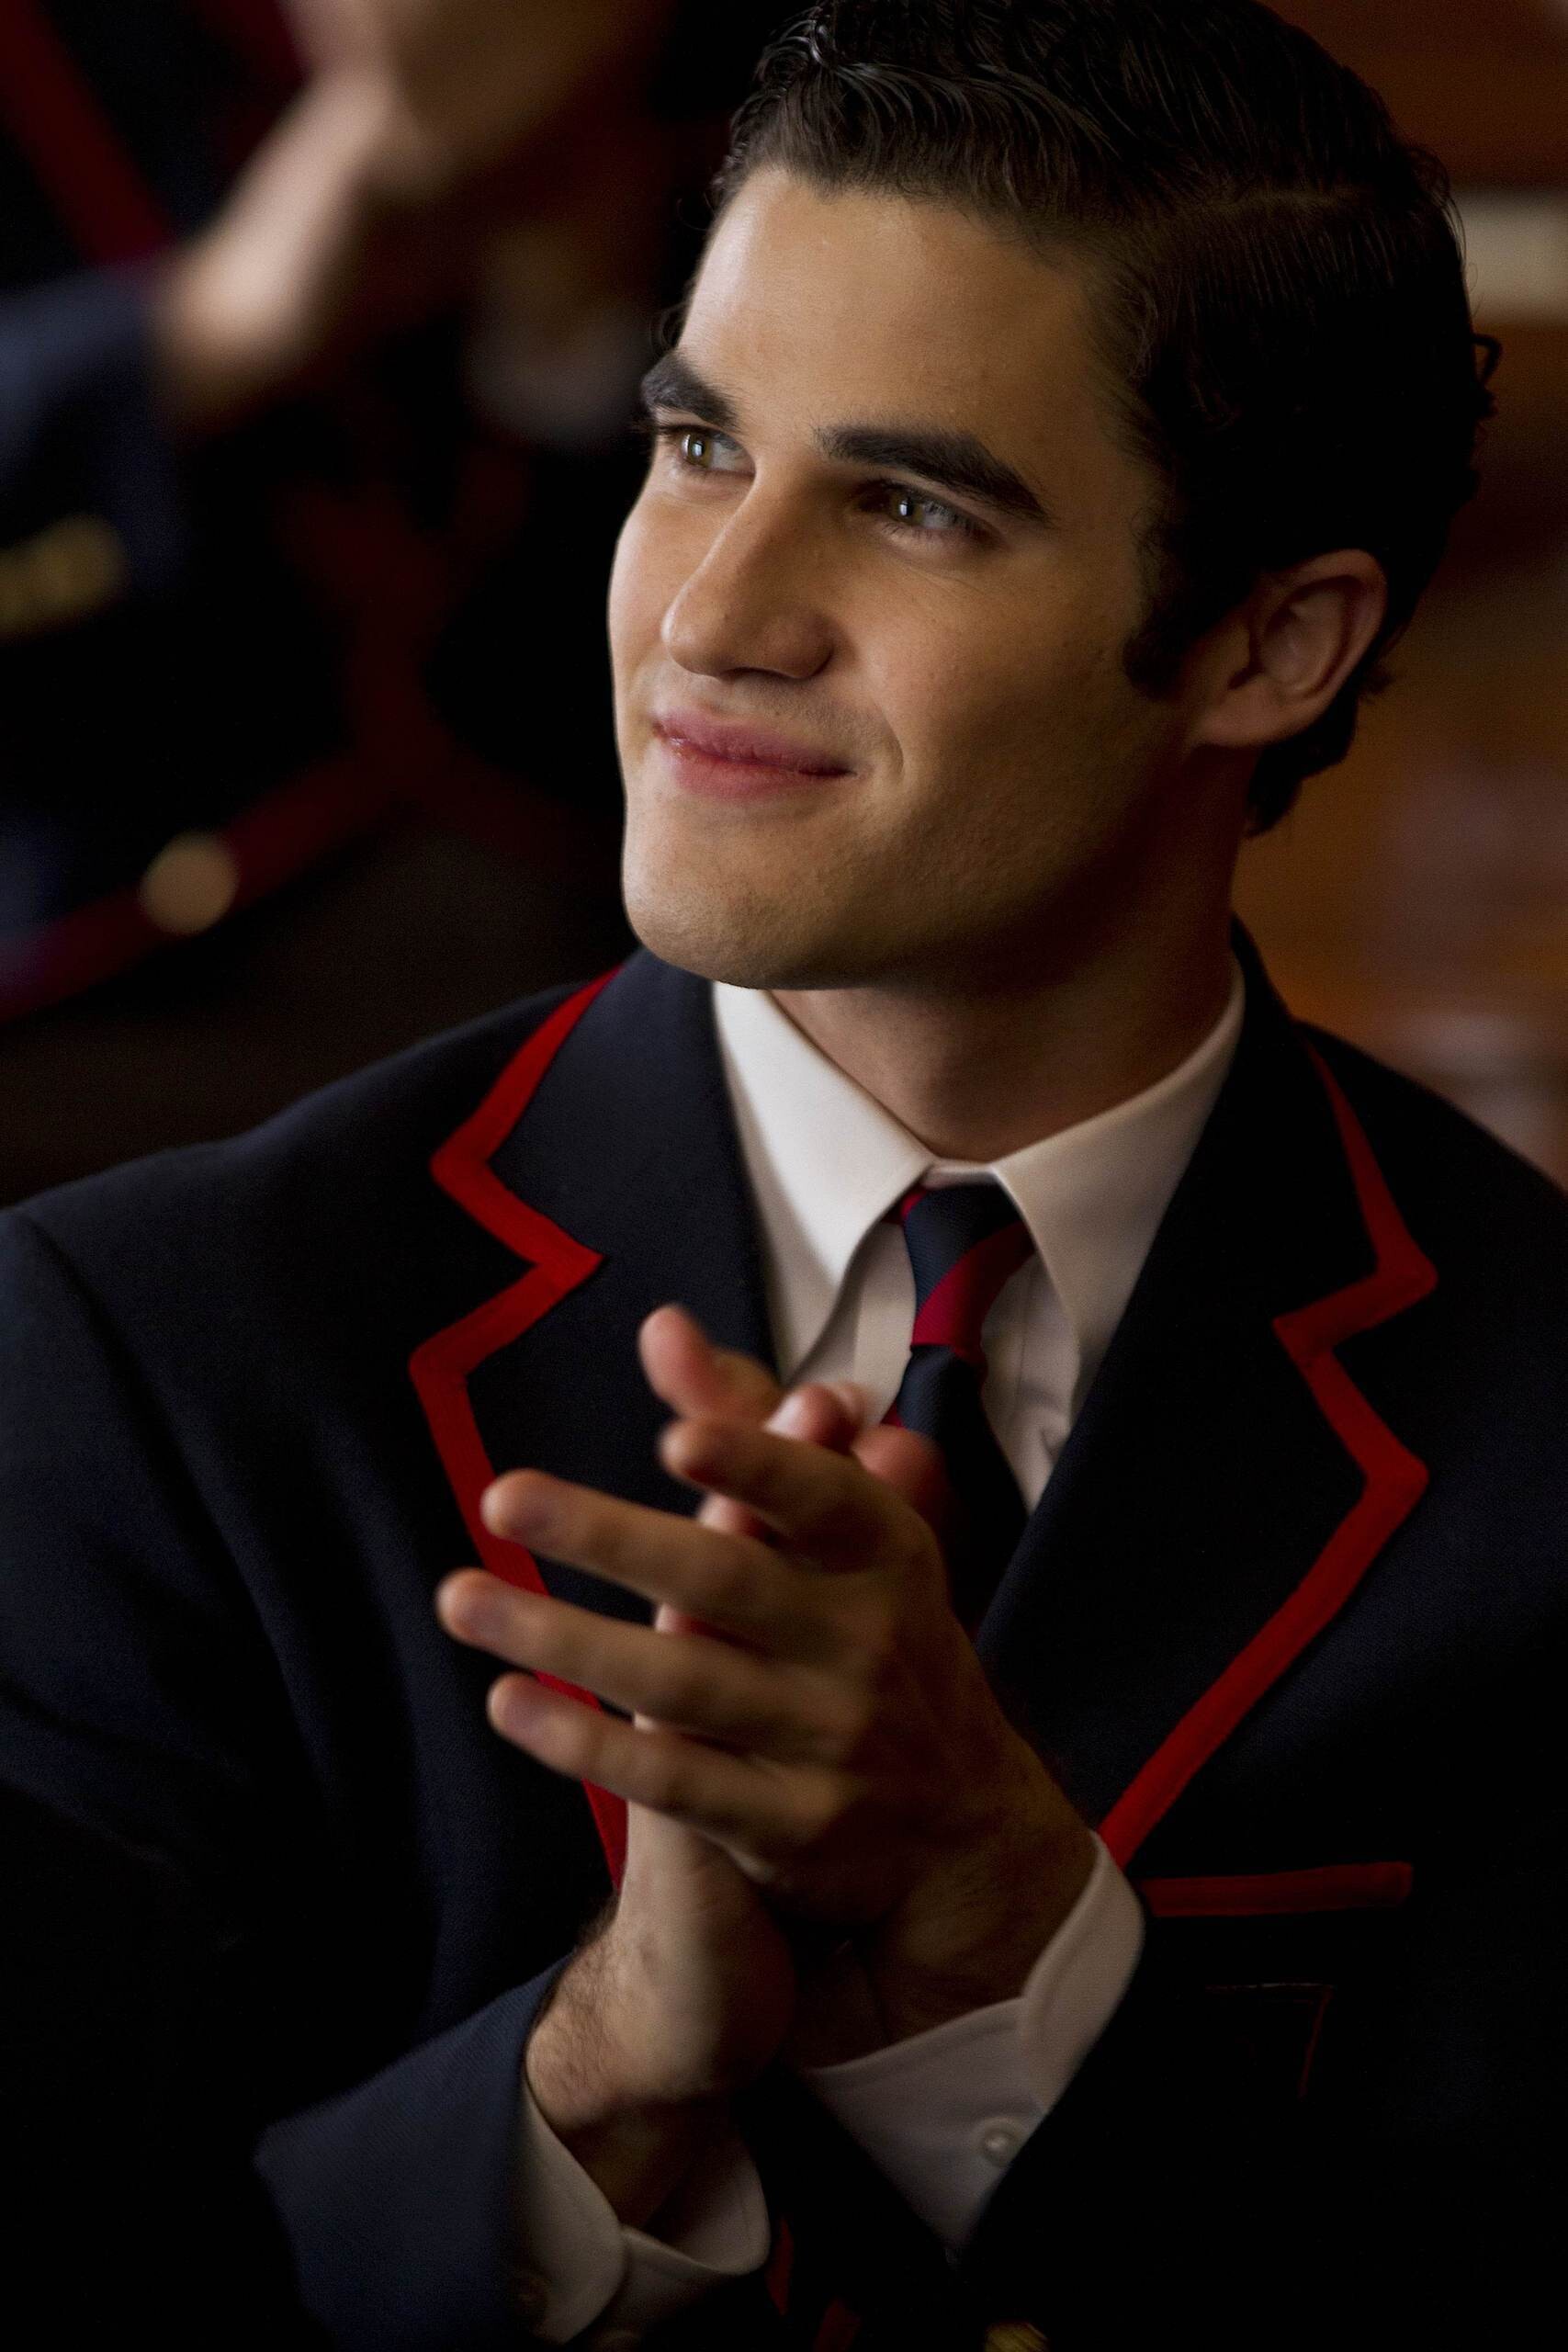 Glee (TV series): Darren Criss as Blaine Anderson, The openly gay lead singer of the Dalton Academy Warblers. 1710x2560 HD Wallpaper.